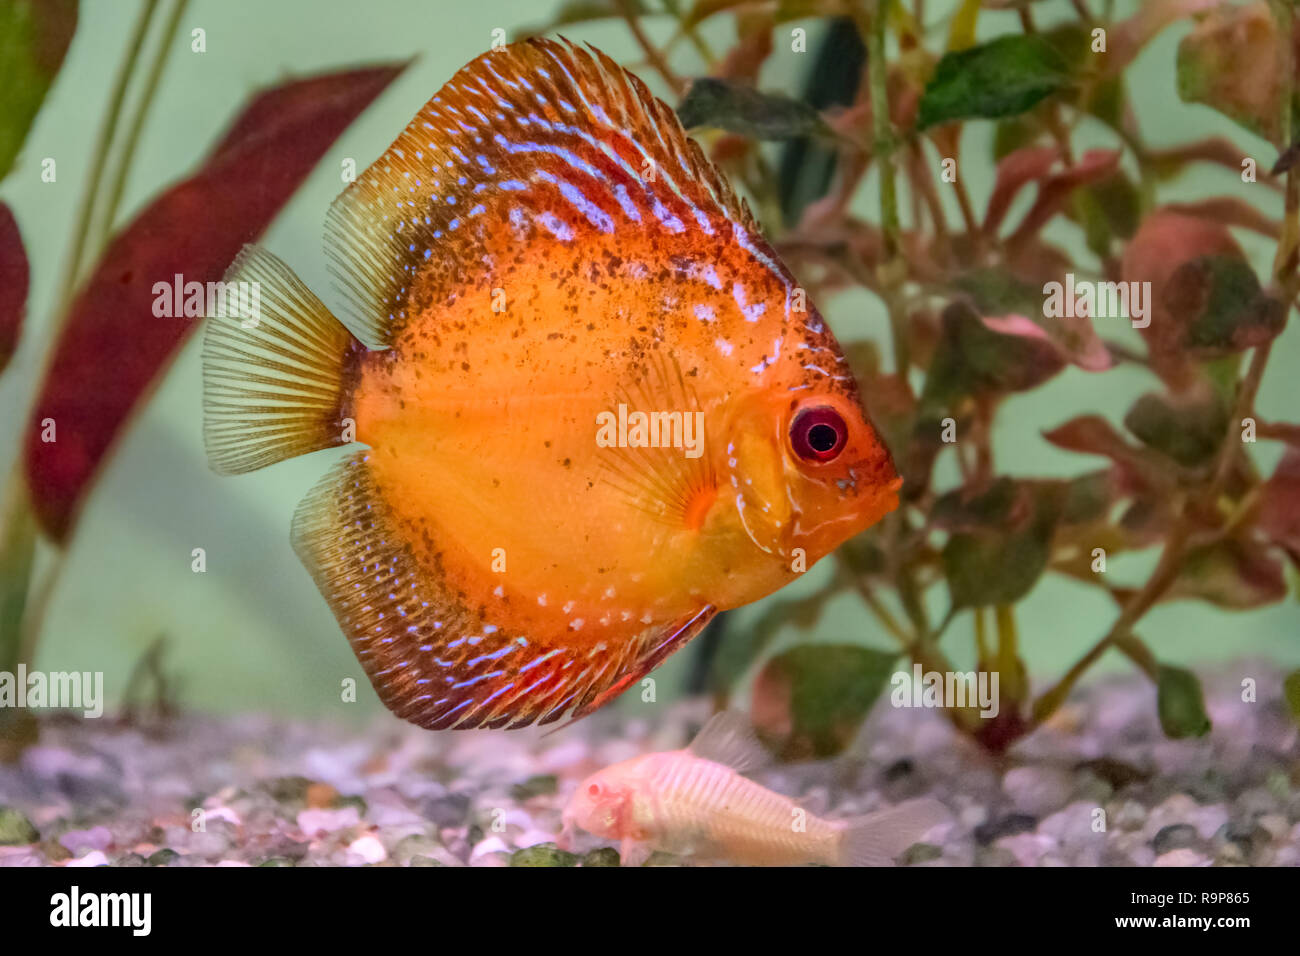 A front view of a orange Discus fish in an aquarium, swimming rightward with some plants in the background and a Albino Corydora over the substrate Stock Photo